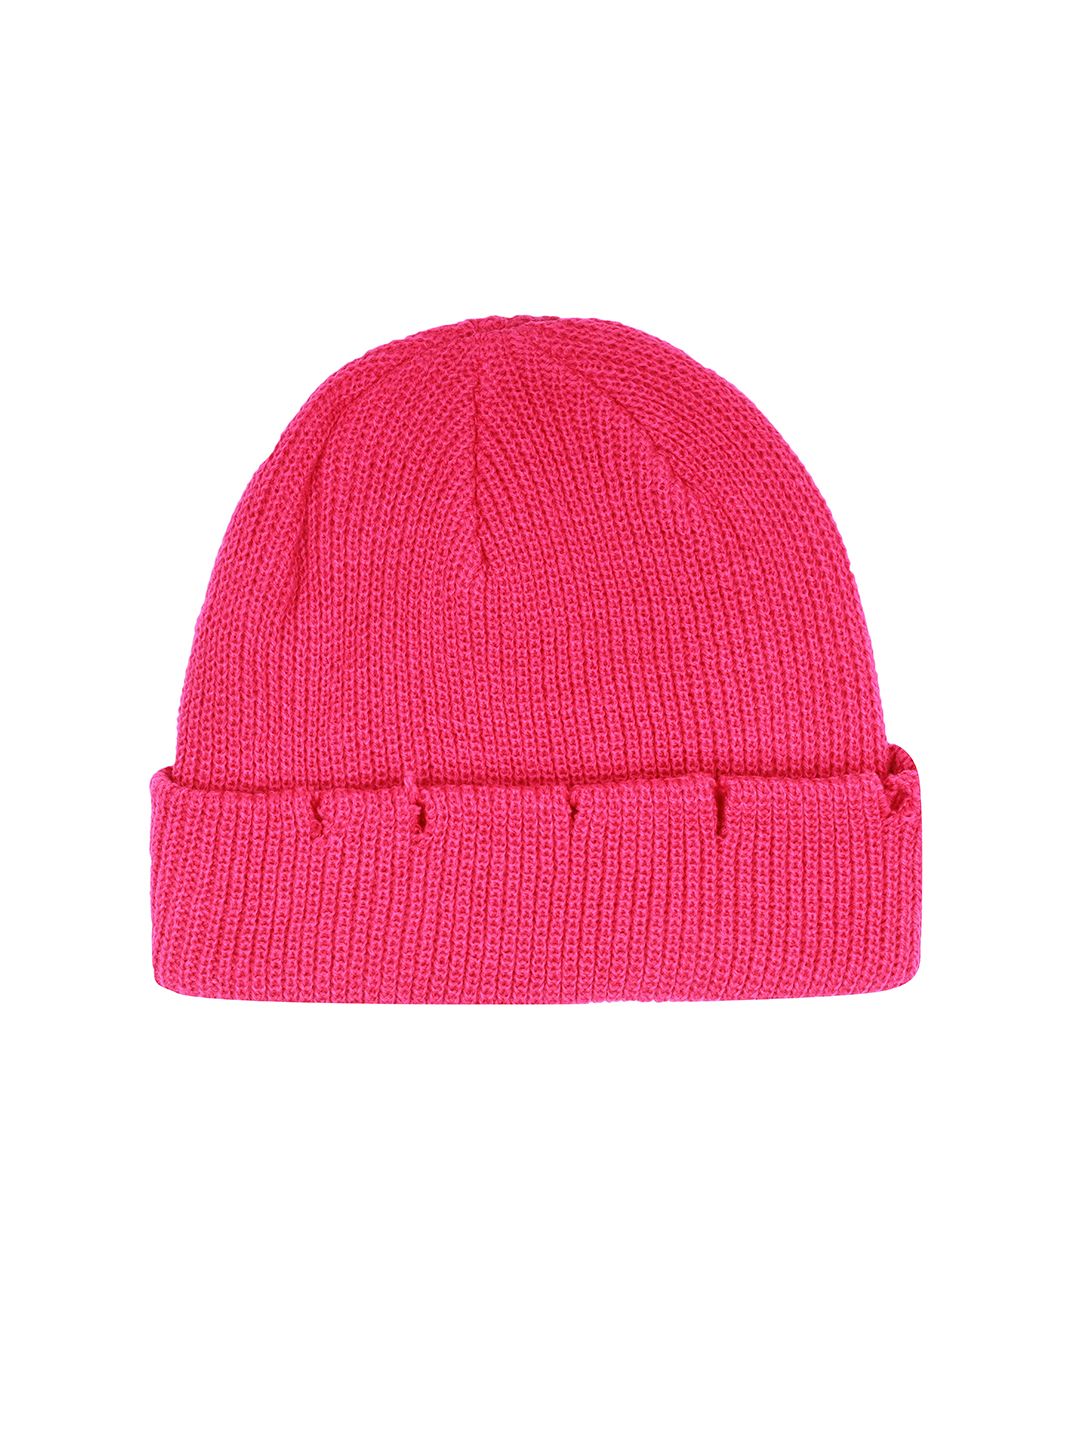 FabSeasons Unisex Pink Beanie Price in India